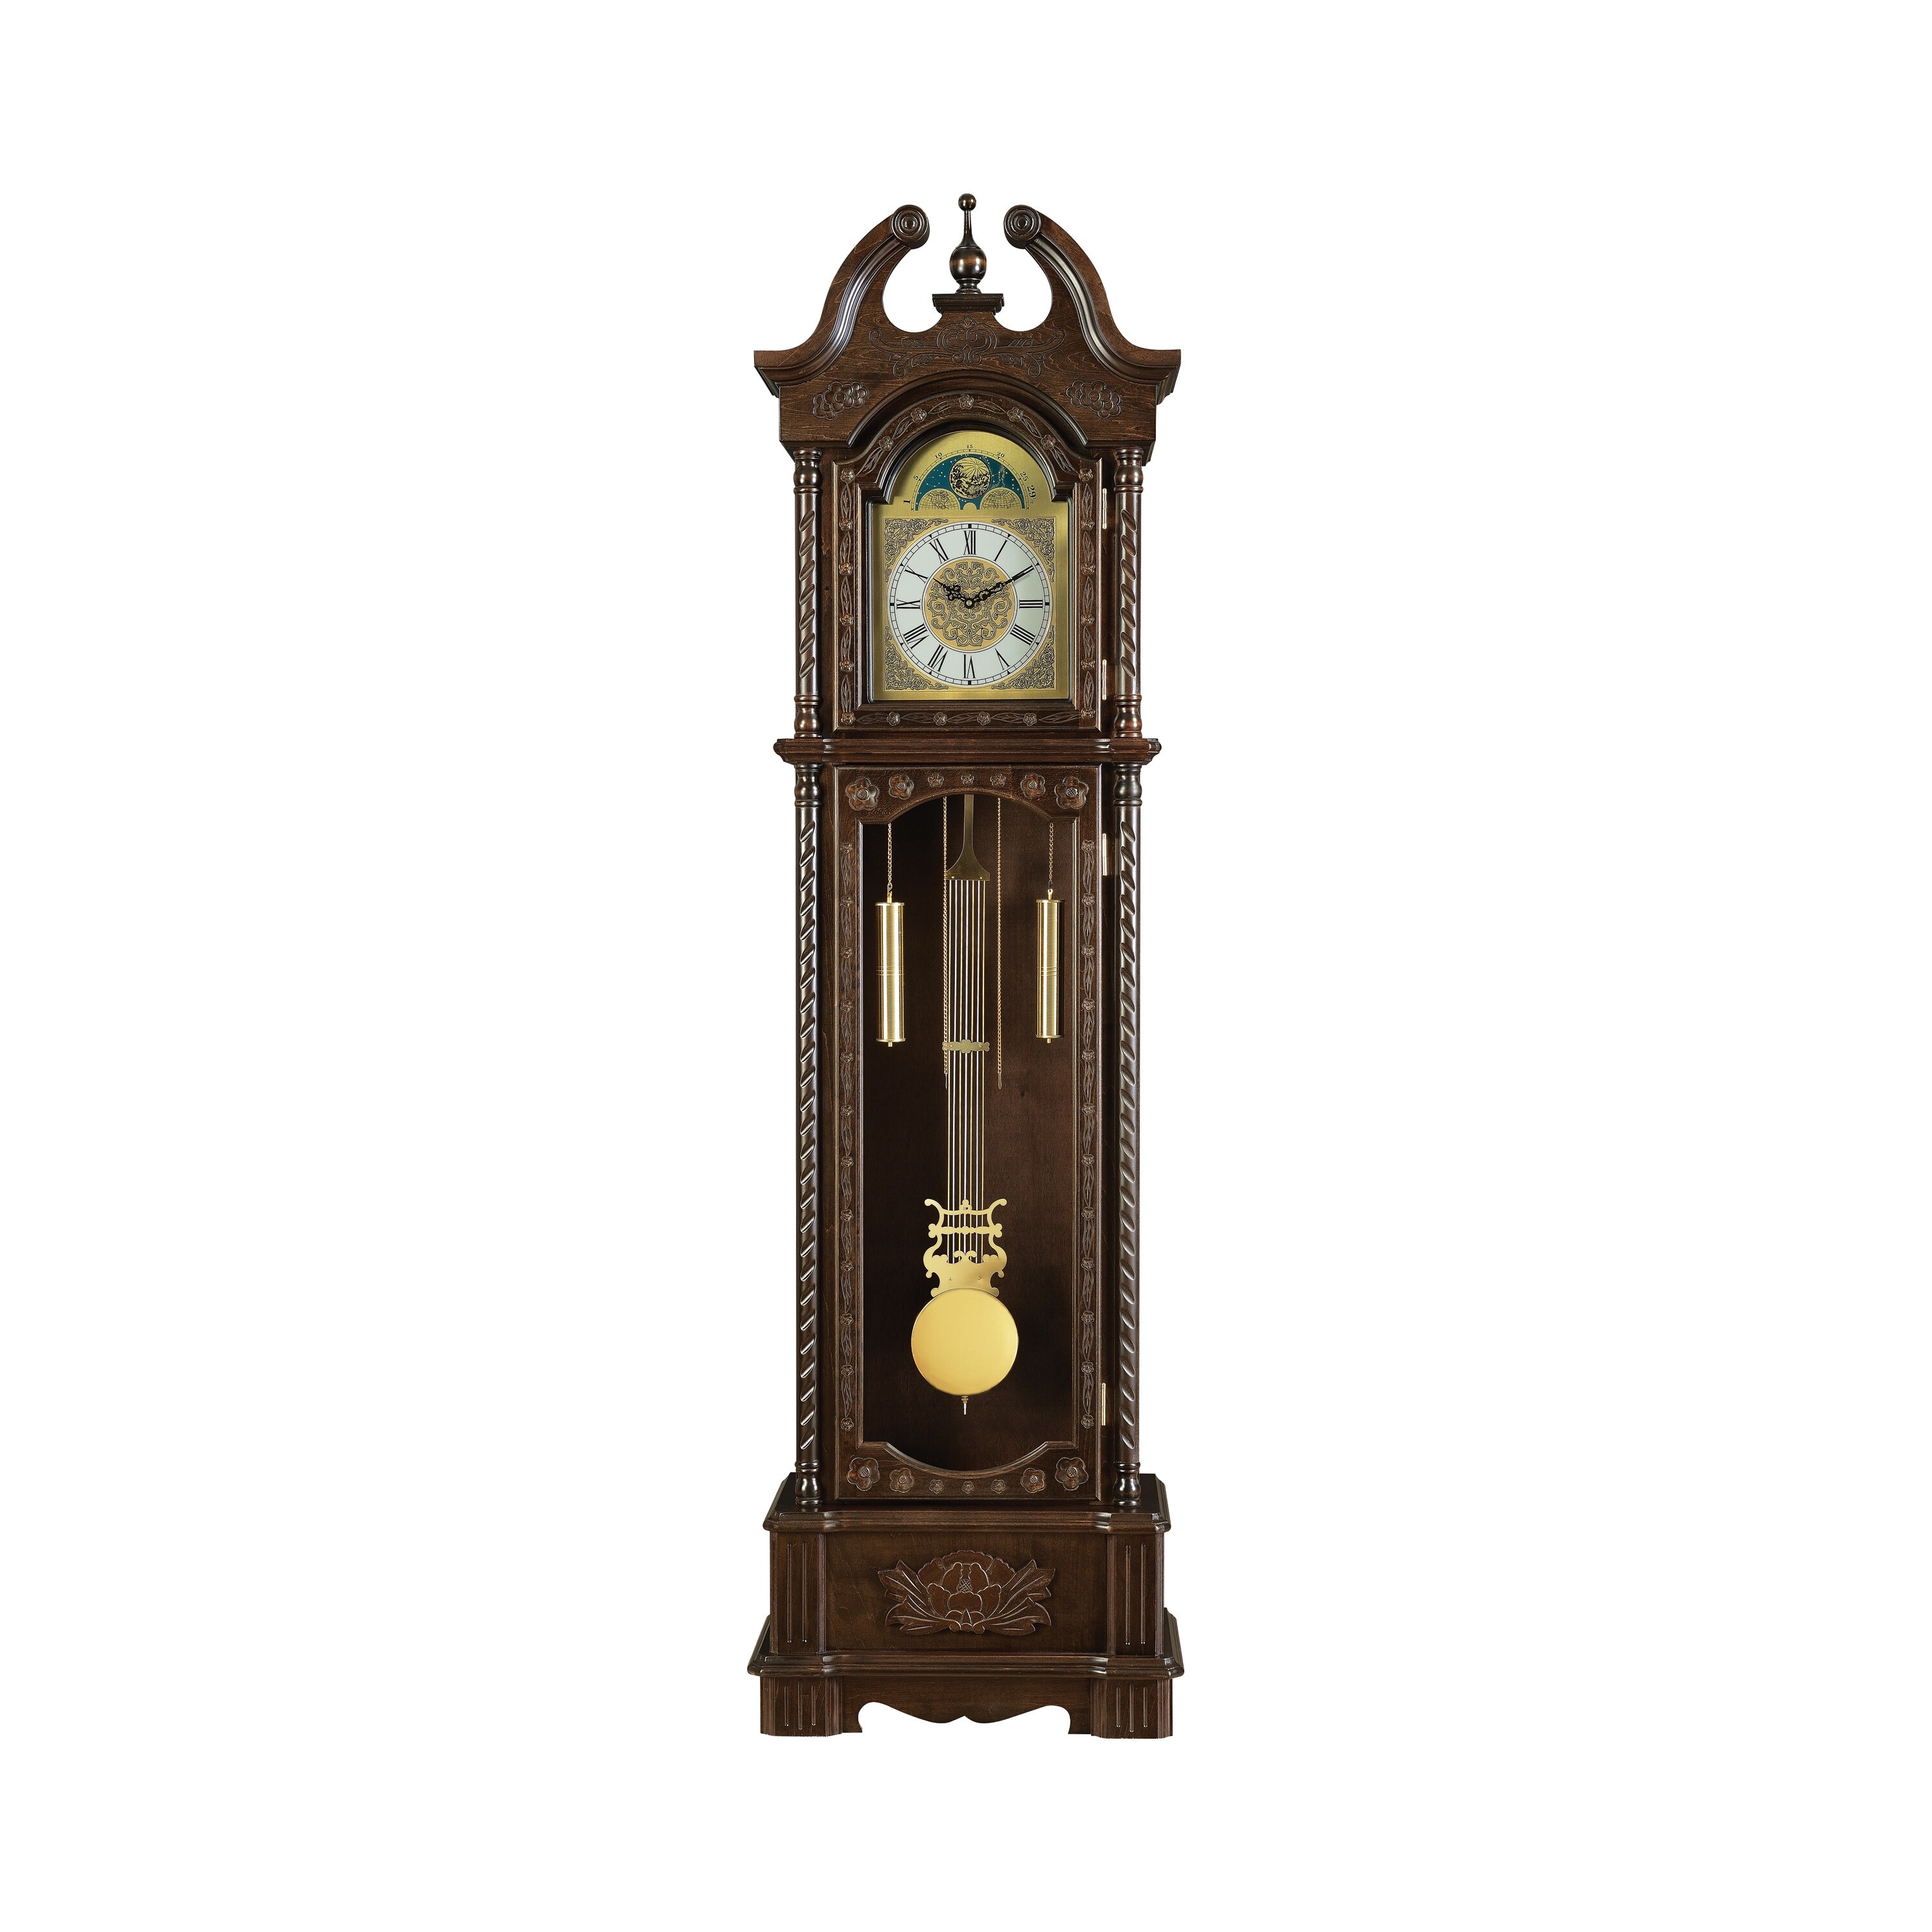 The new GFC-0401 Grandfather Clock takes its design cues from the